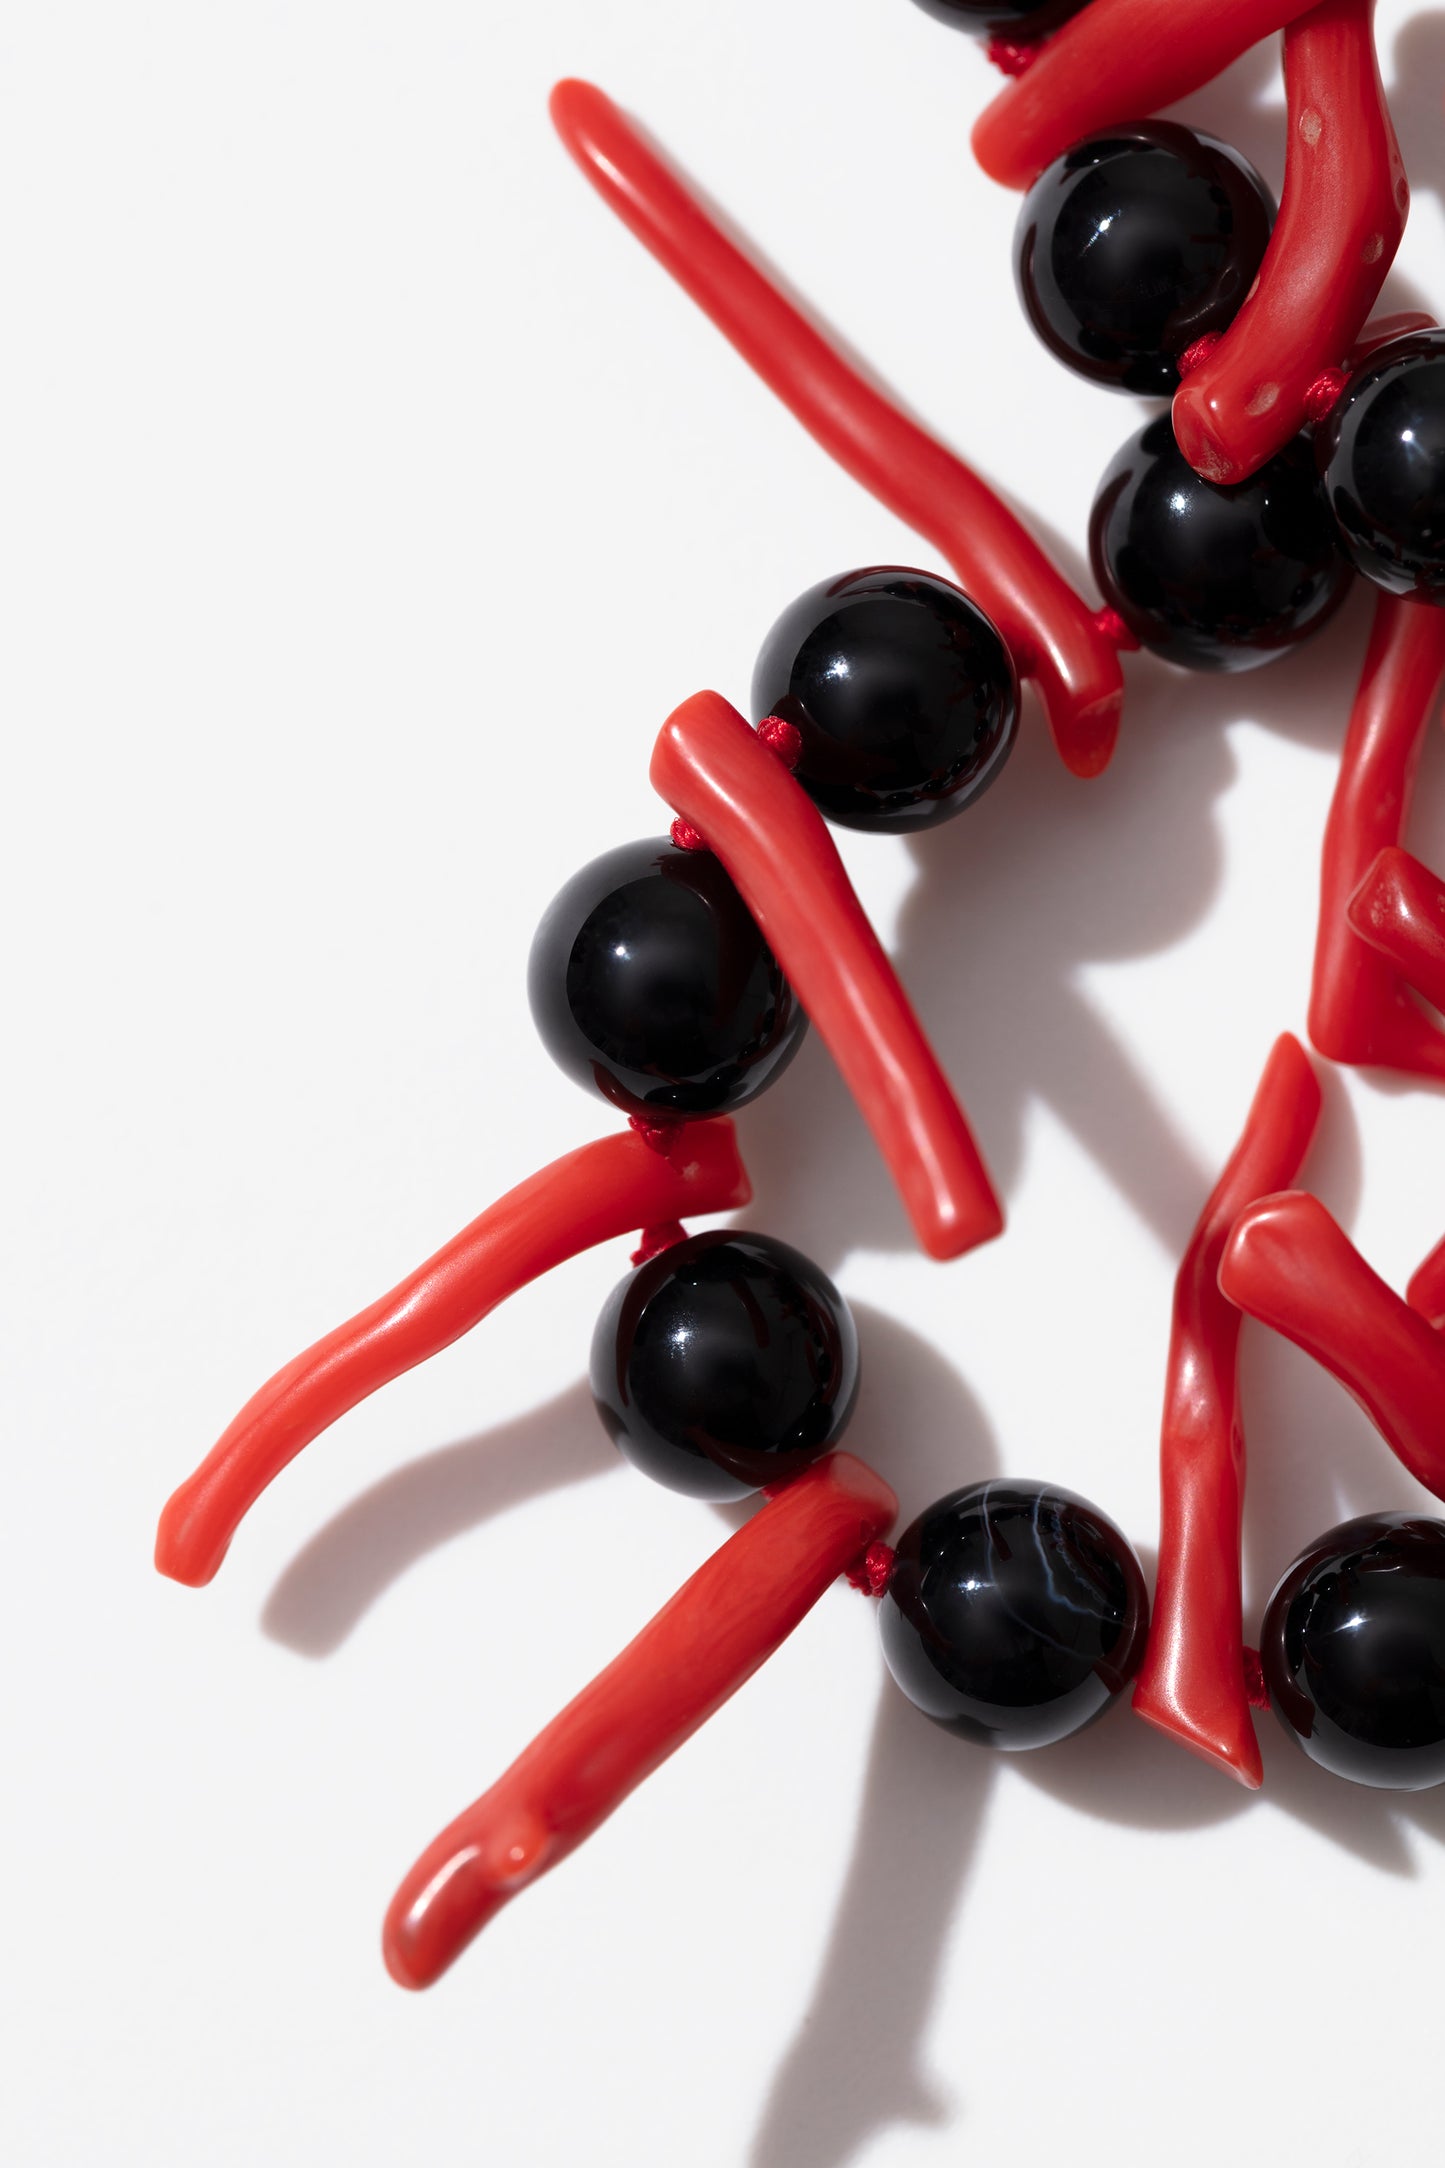 Onyx and Italian Vintage Red Coral Sticks Necklace